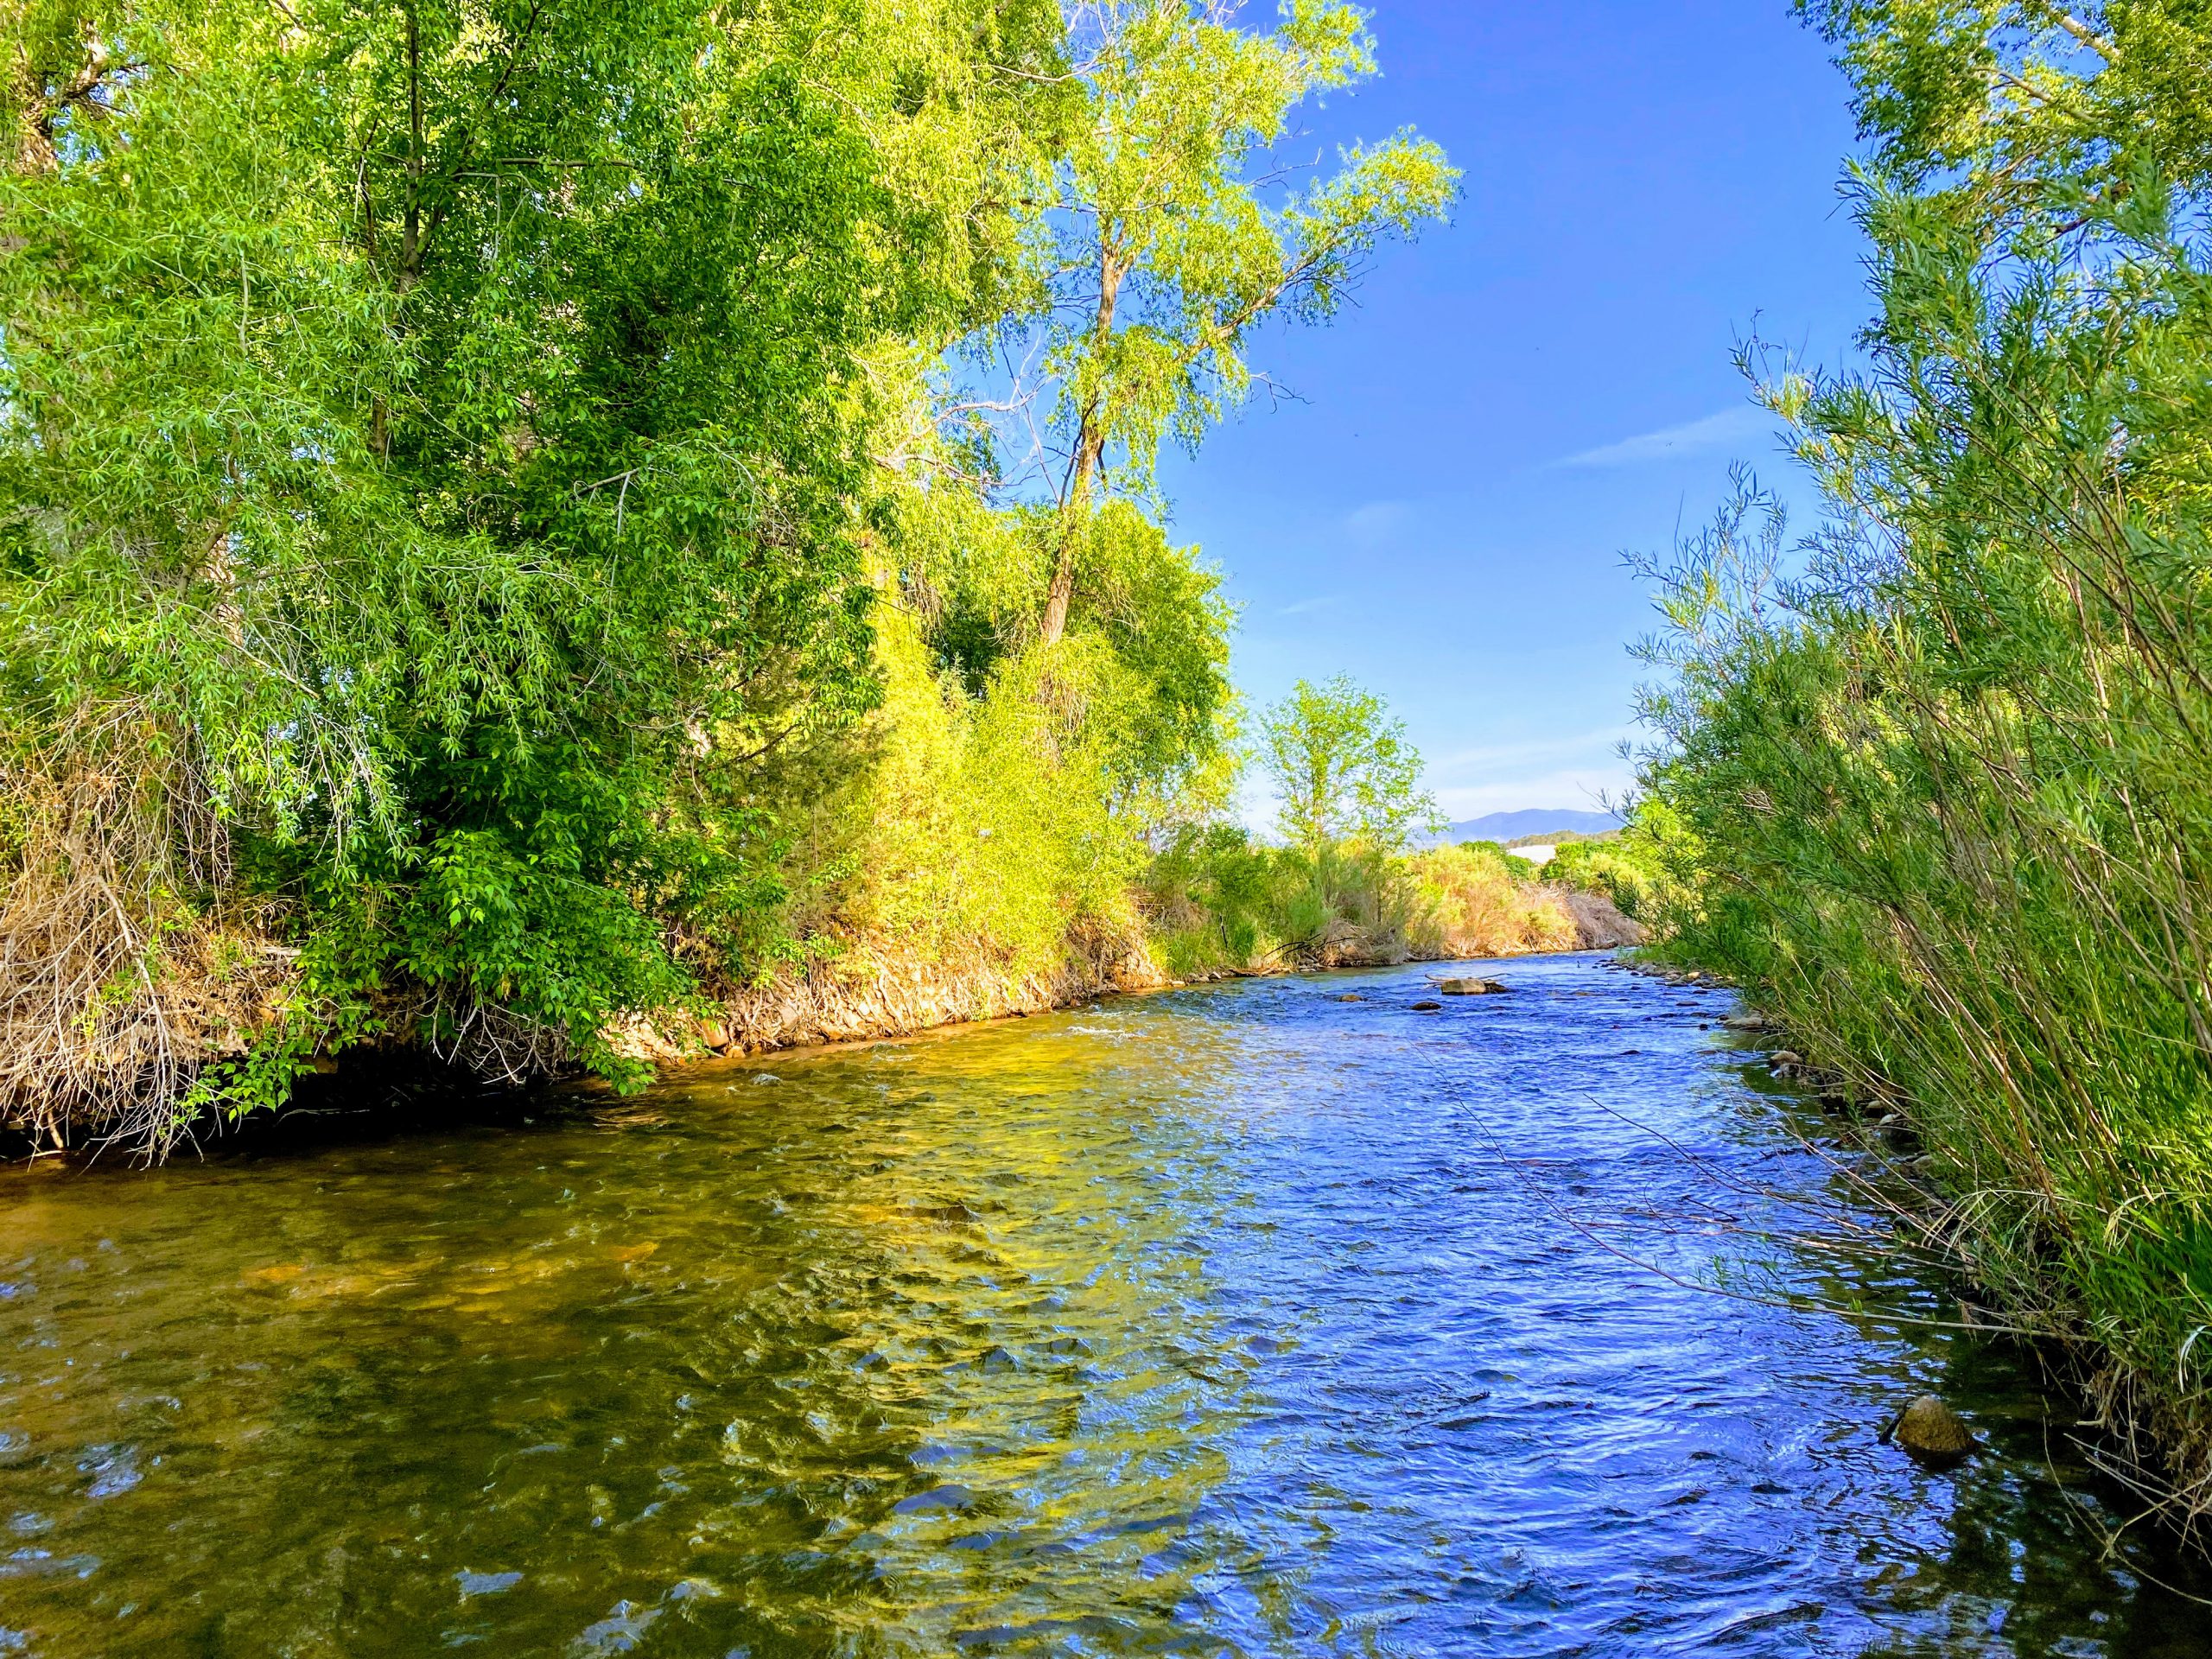 Local communities applaud Lujan Grisham administration’s support for water protections for northern New Mexico streams